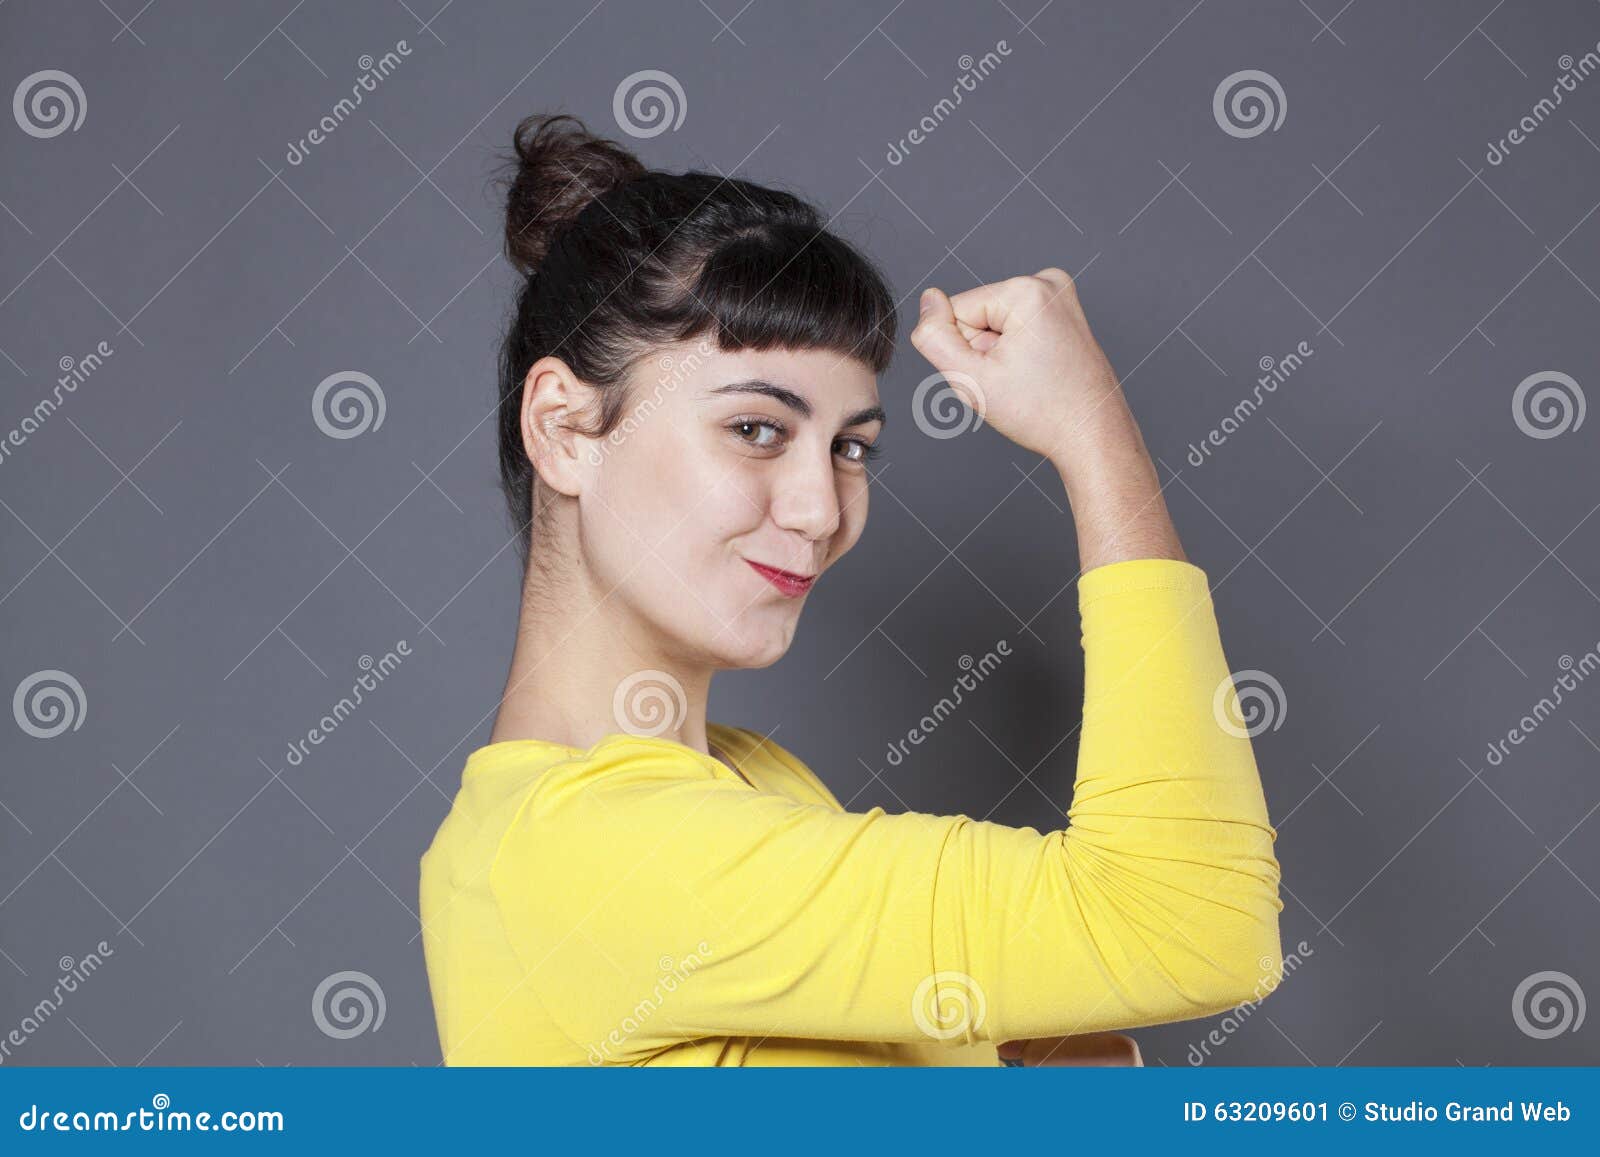 girl power concept for thrilled young brunette